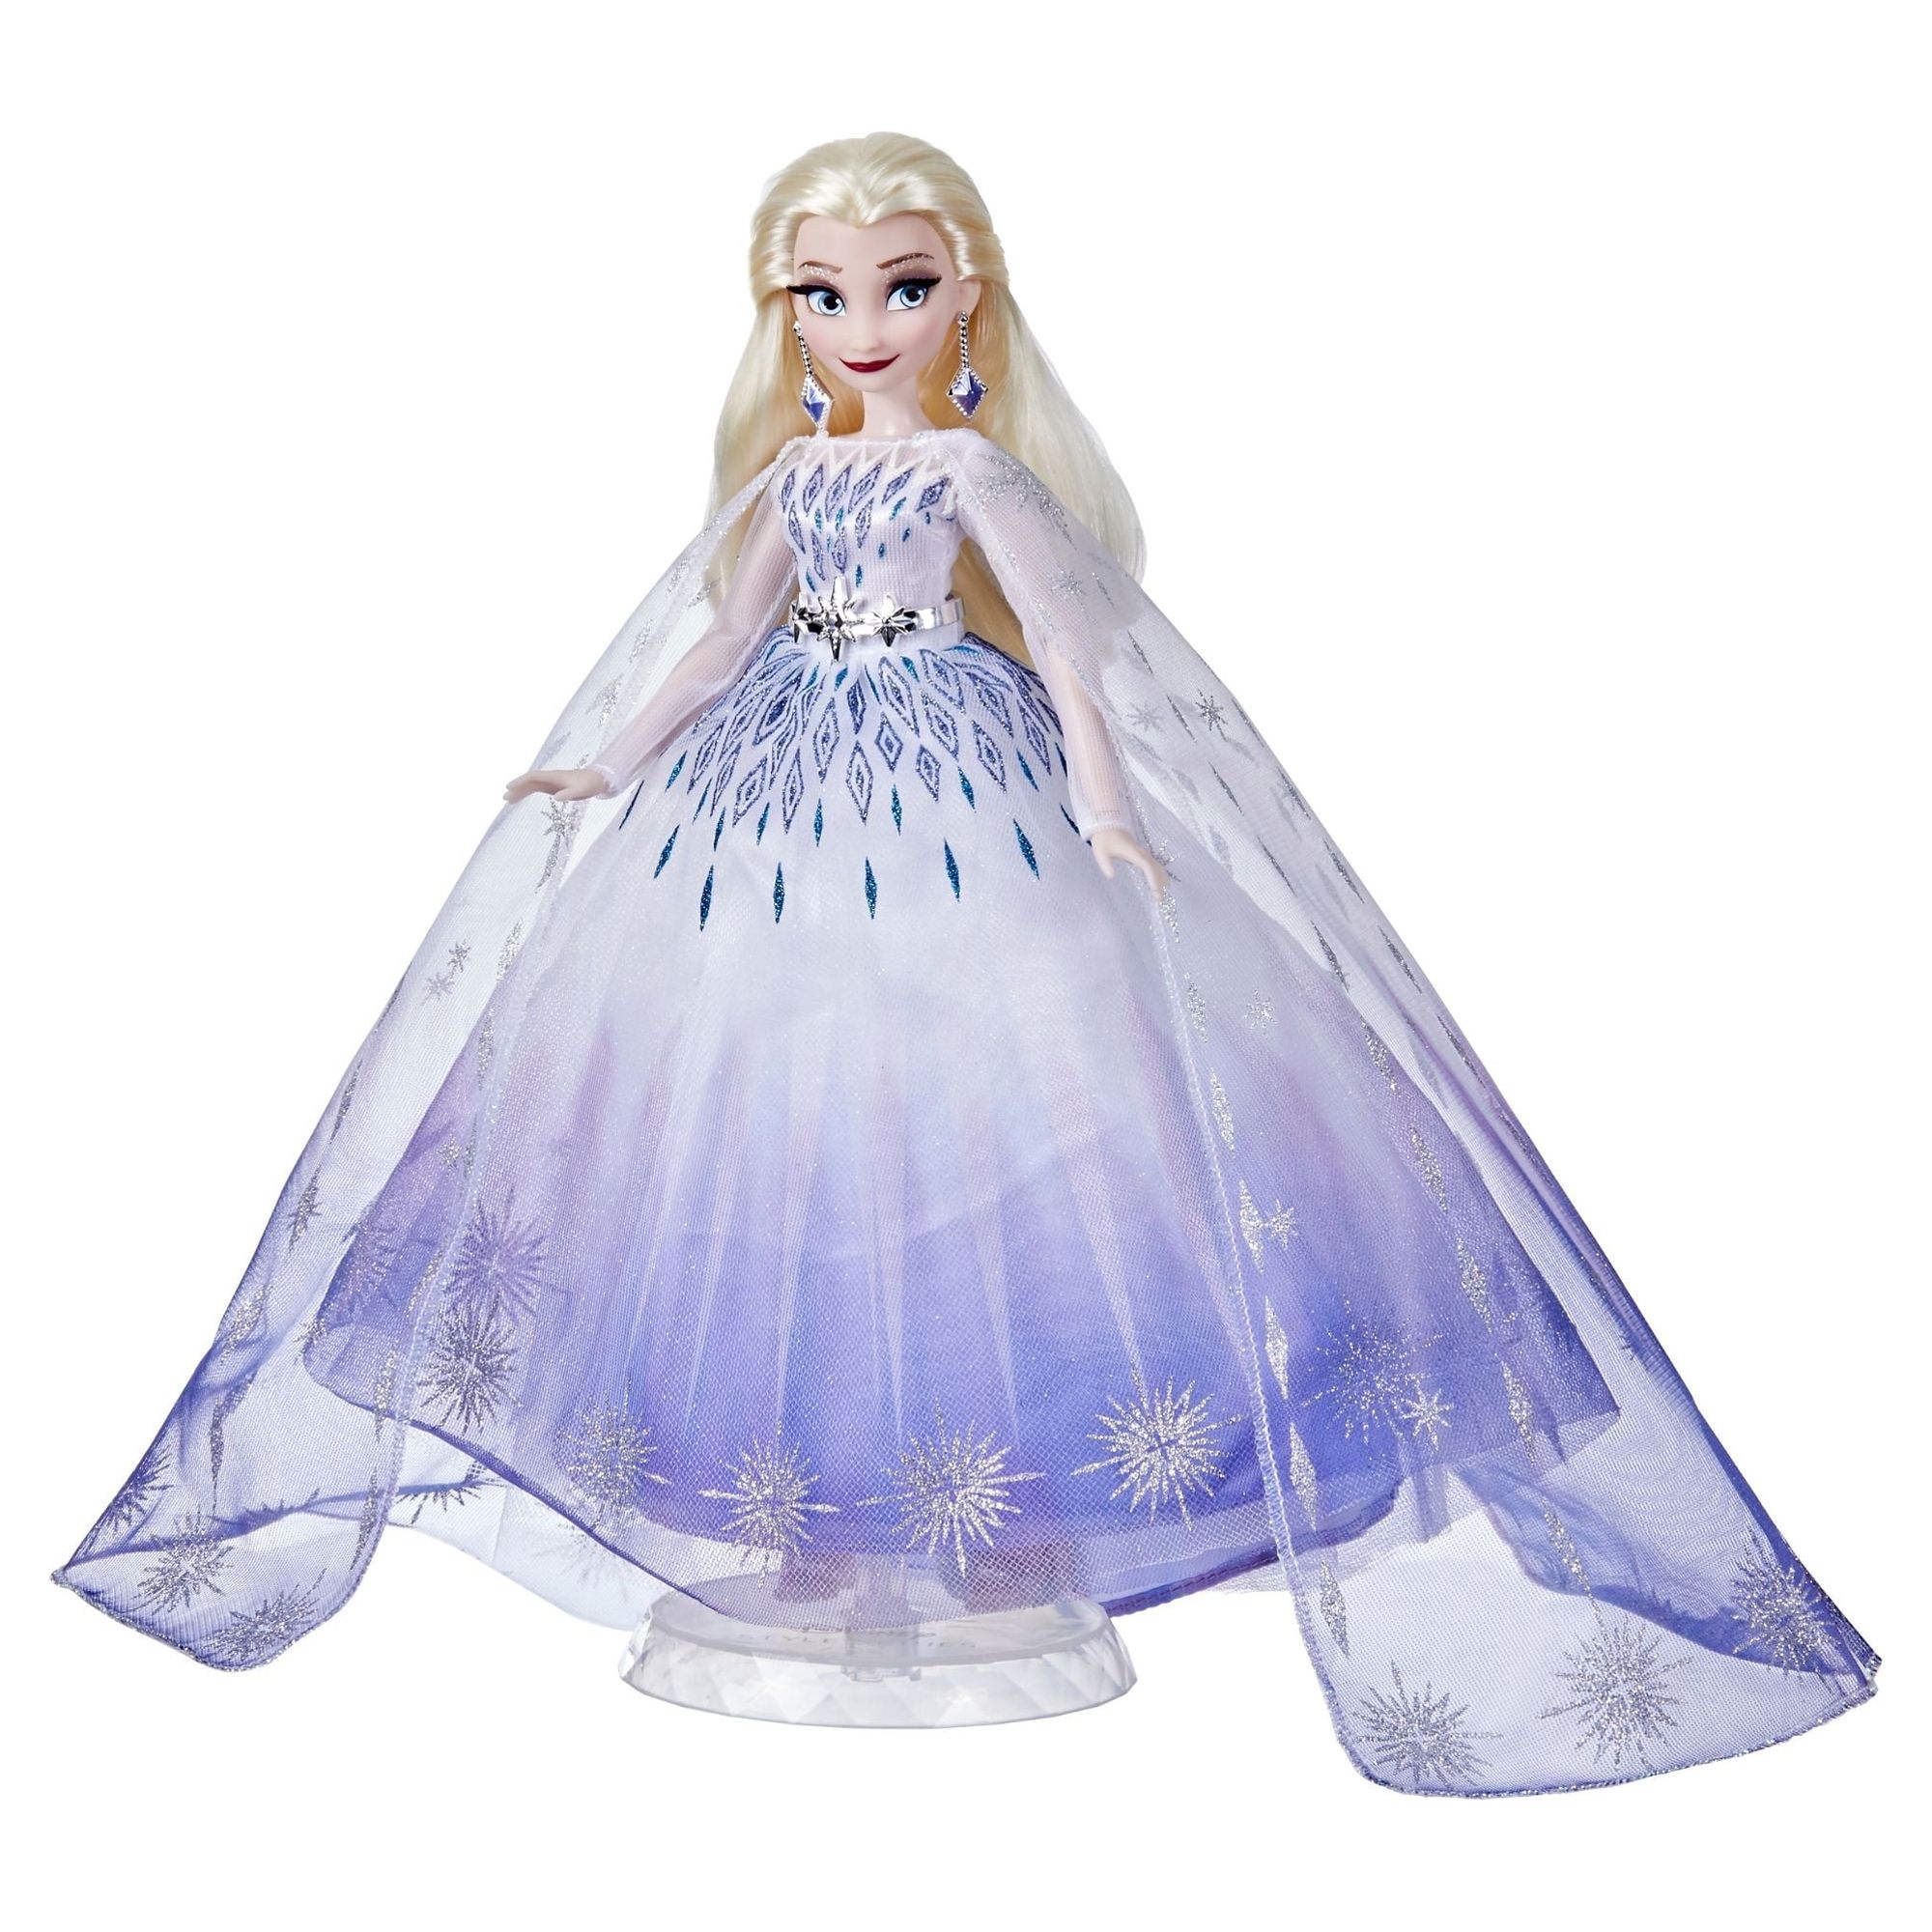 Disney Princess Style Series Holiday Elsa Doll, Fashion Doll Accessories - image 1 of 7